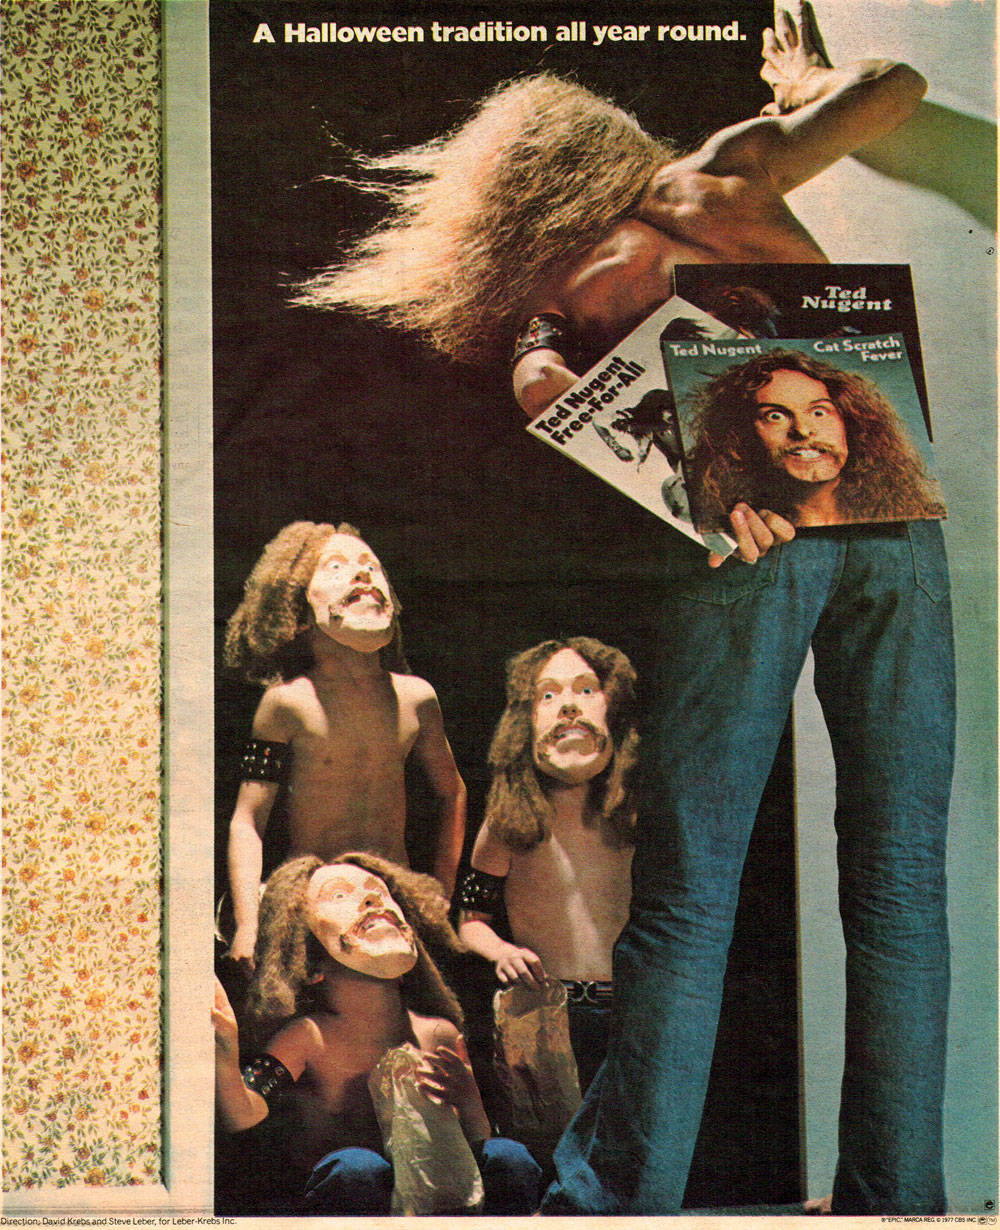 Photo - 1977 Print Ad For Ted Nugent Halloween Costume